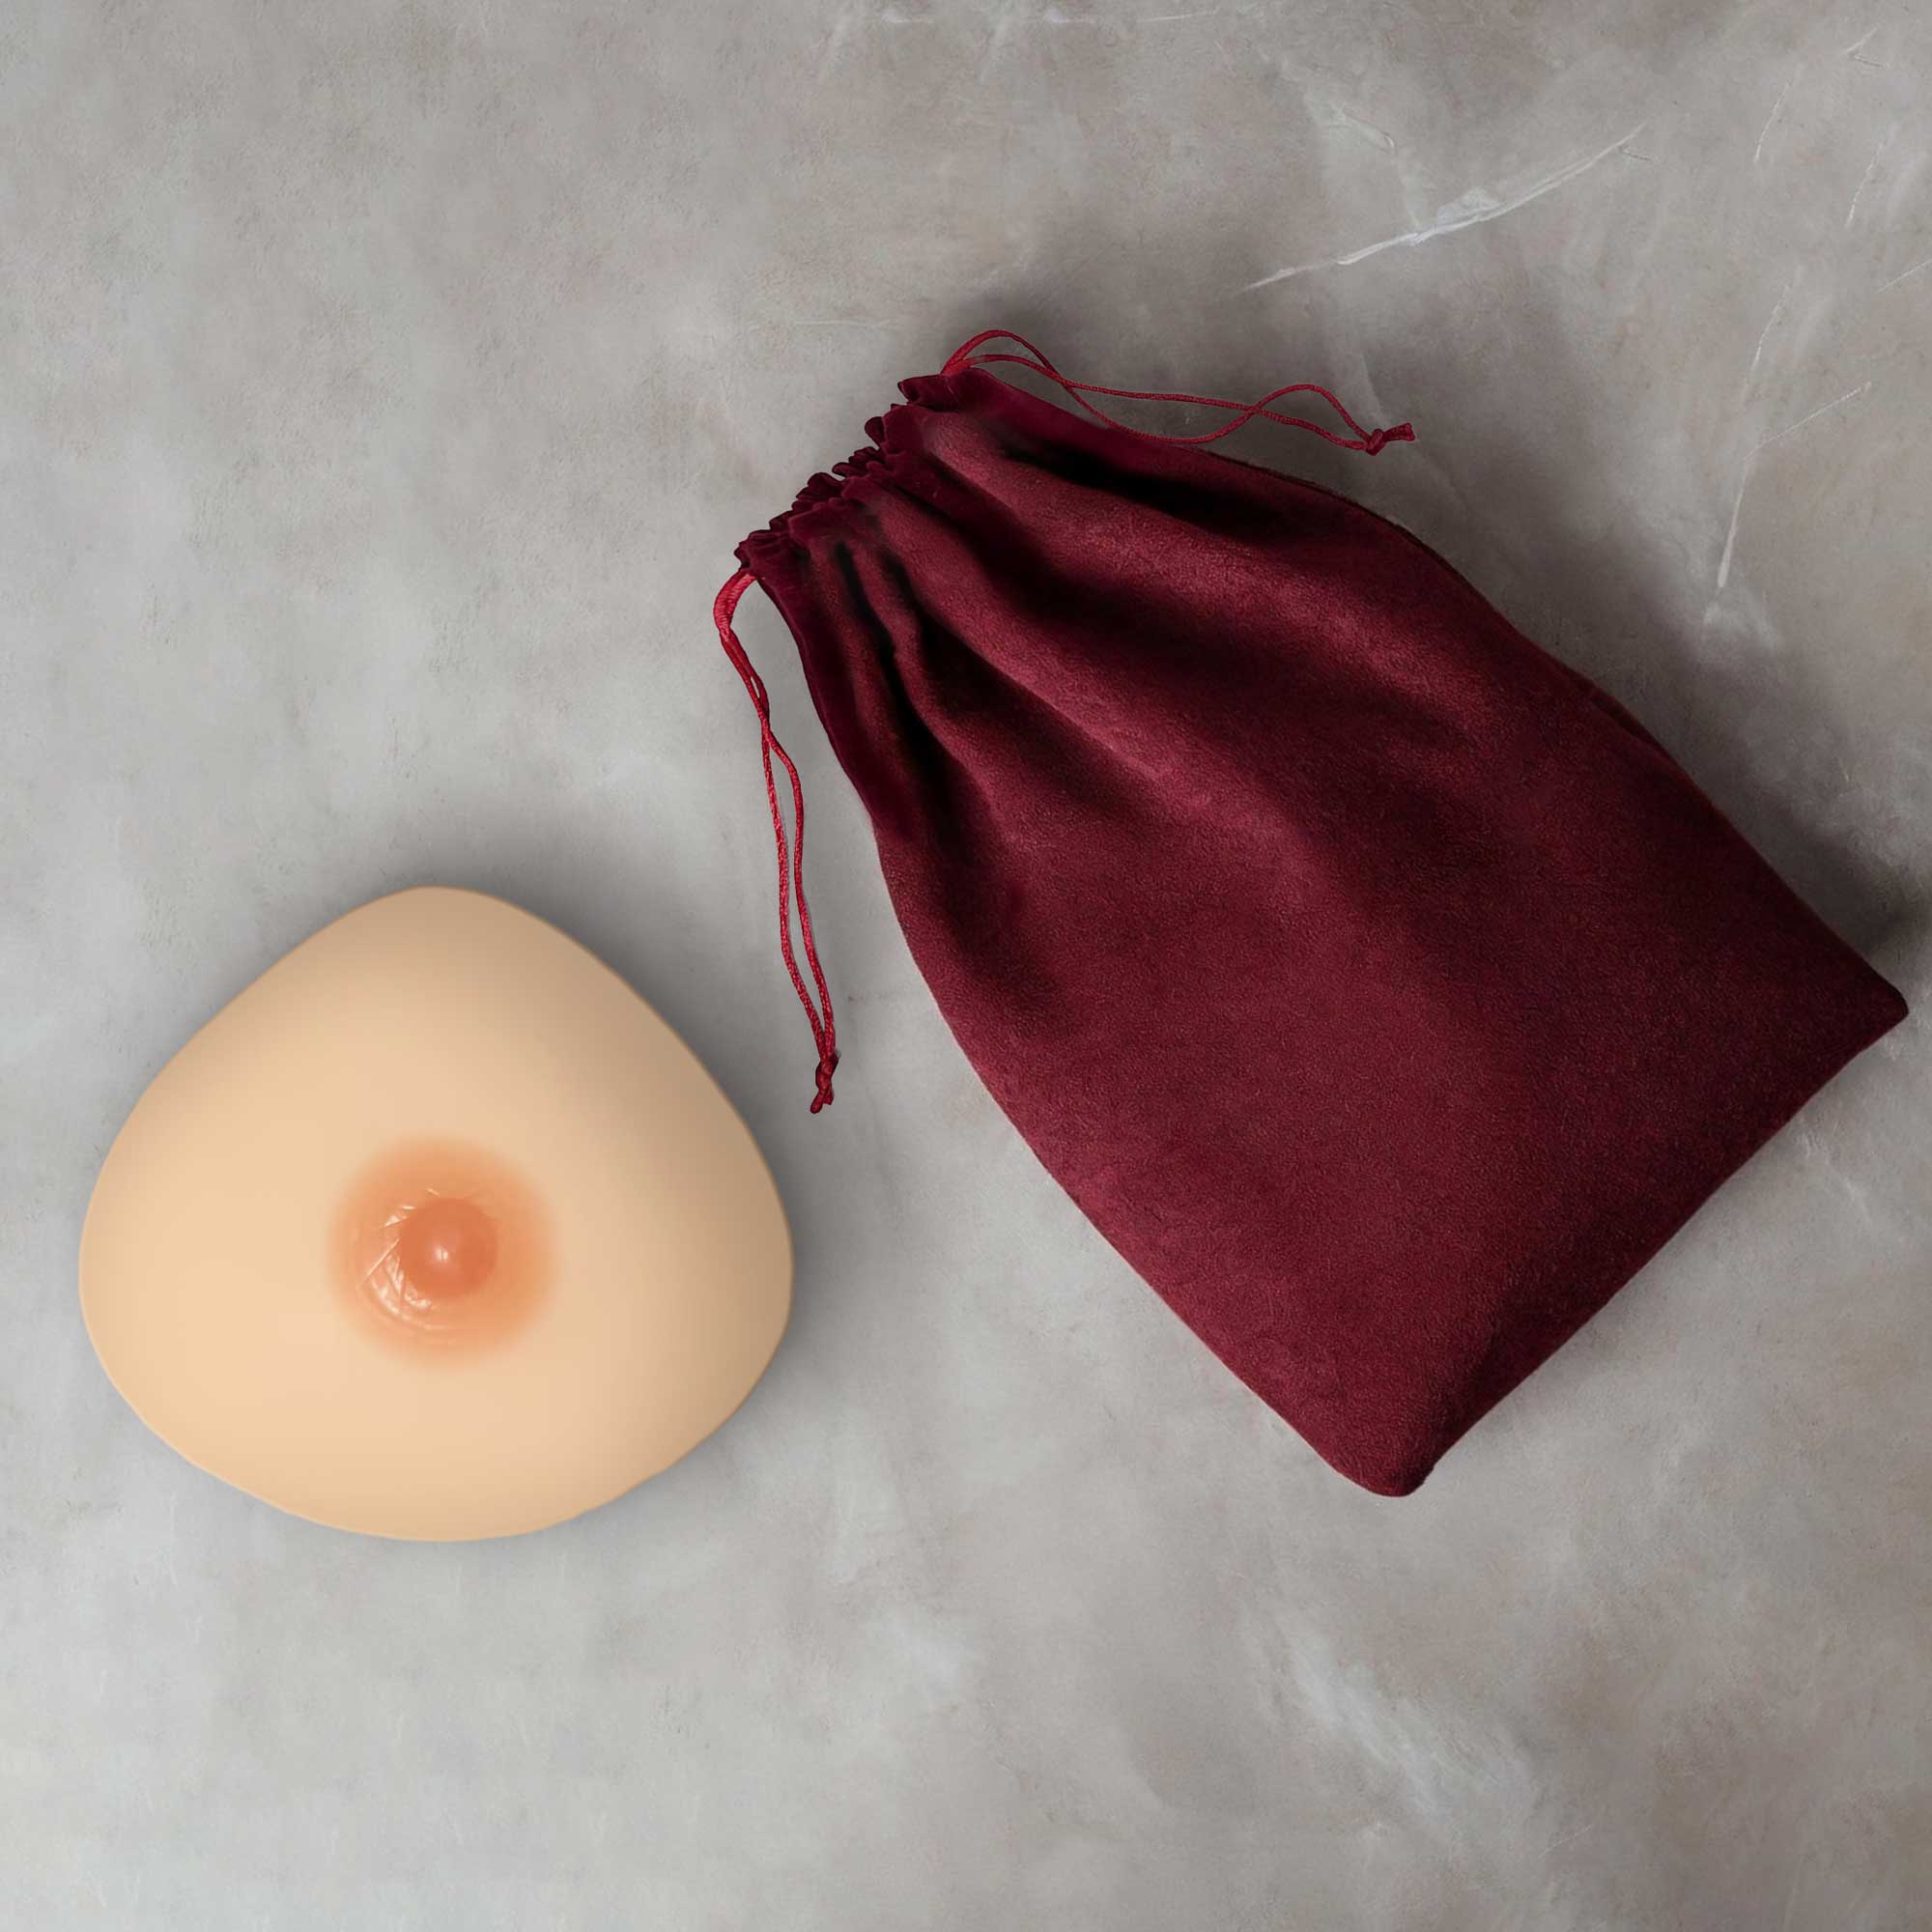 Silicone Breastforms from Hollywood